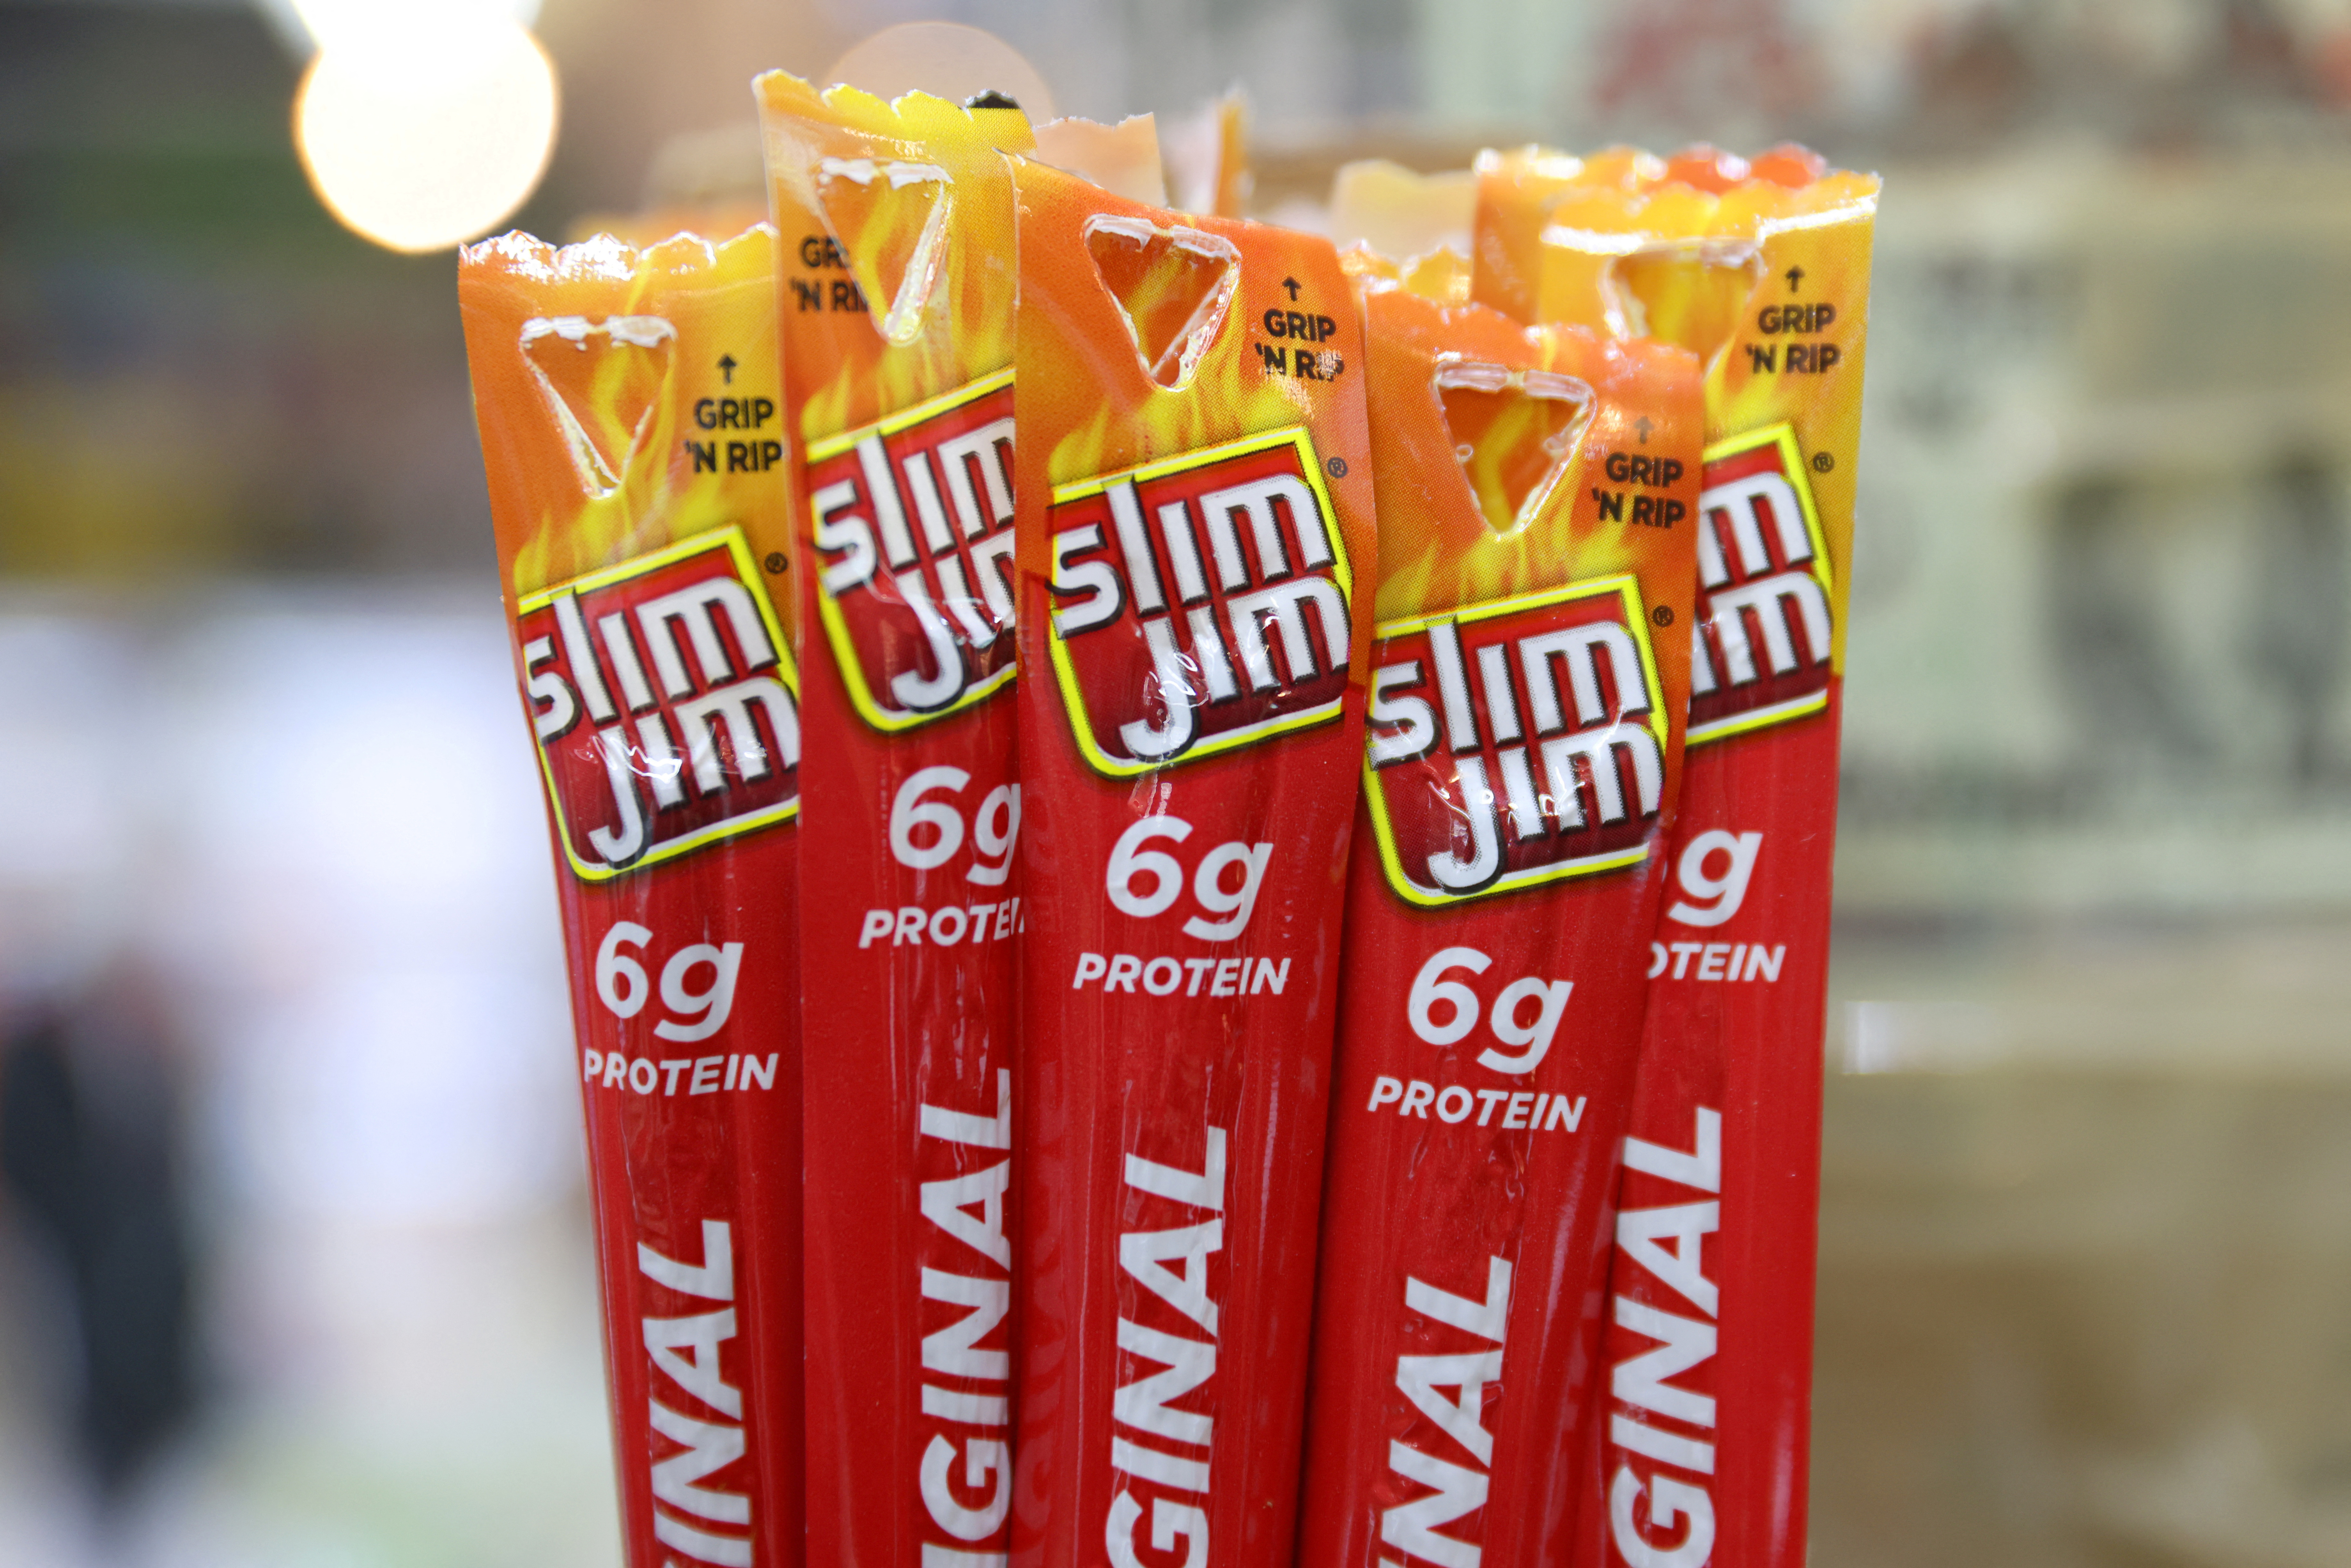 Slim Jim products, owned by Conagra Brands, are seen for sale in a store in Manhattan, New York